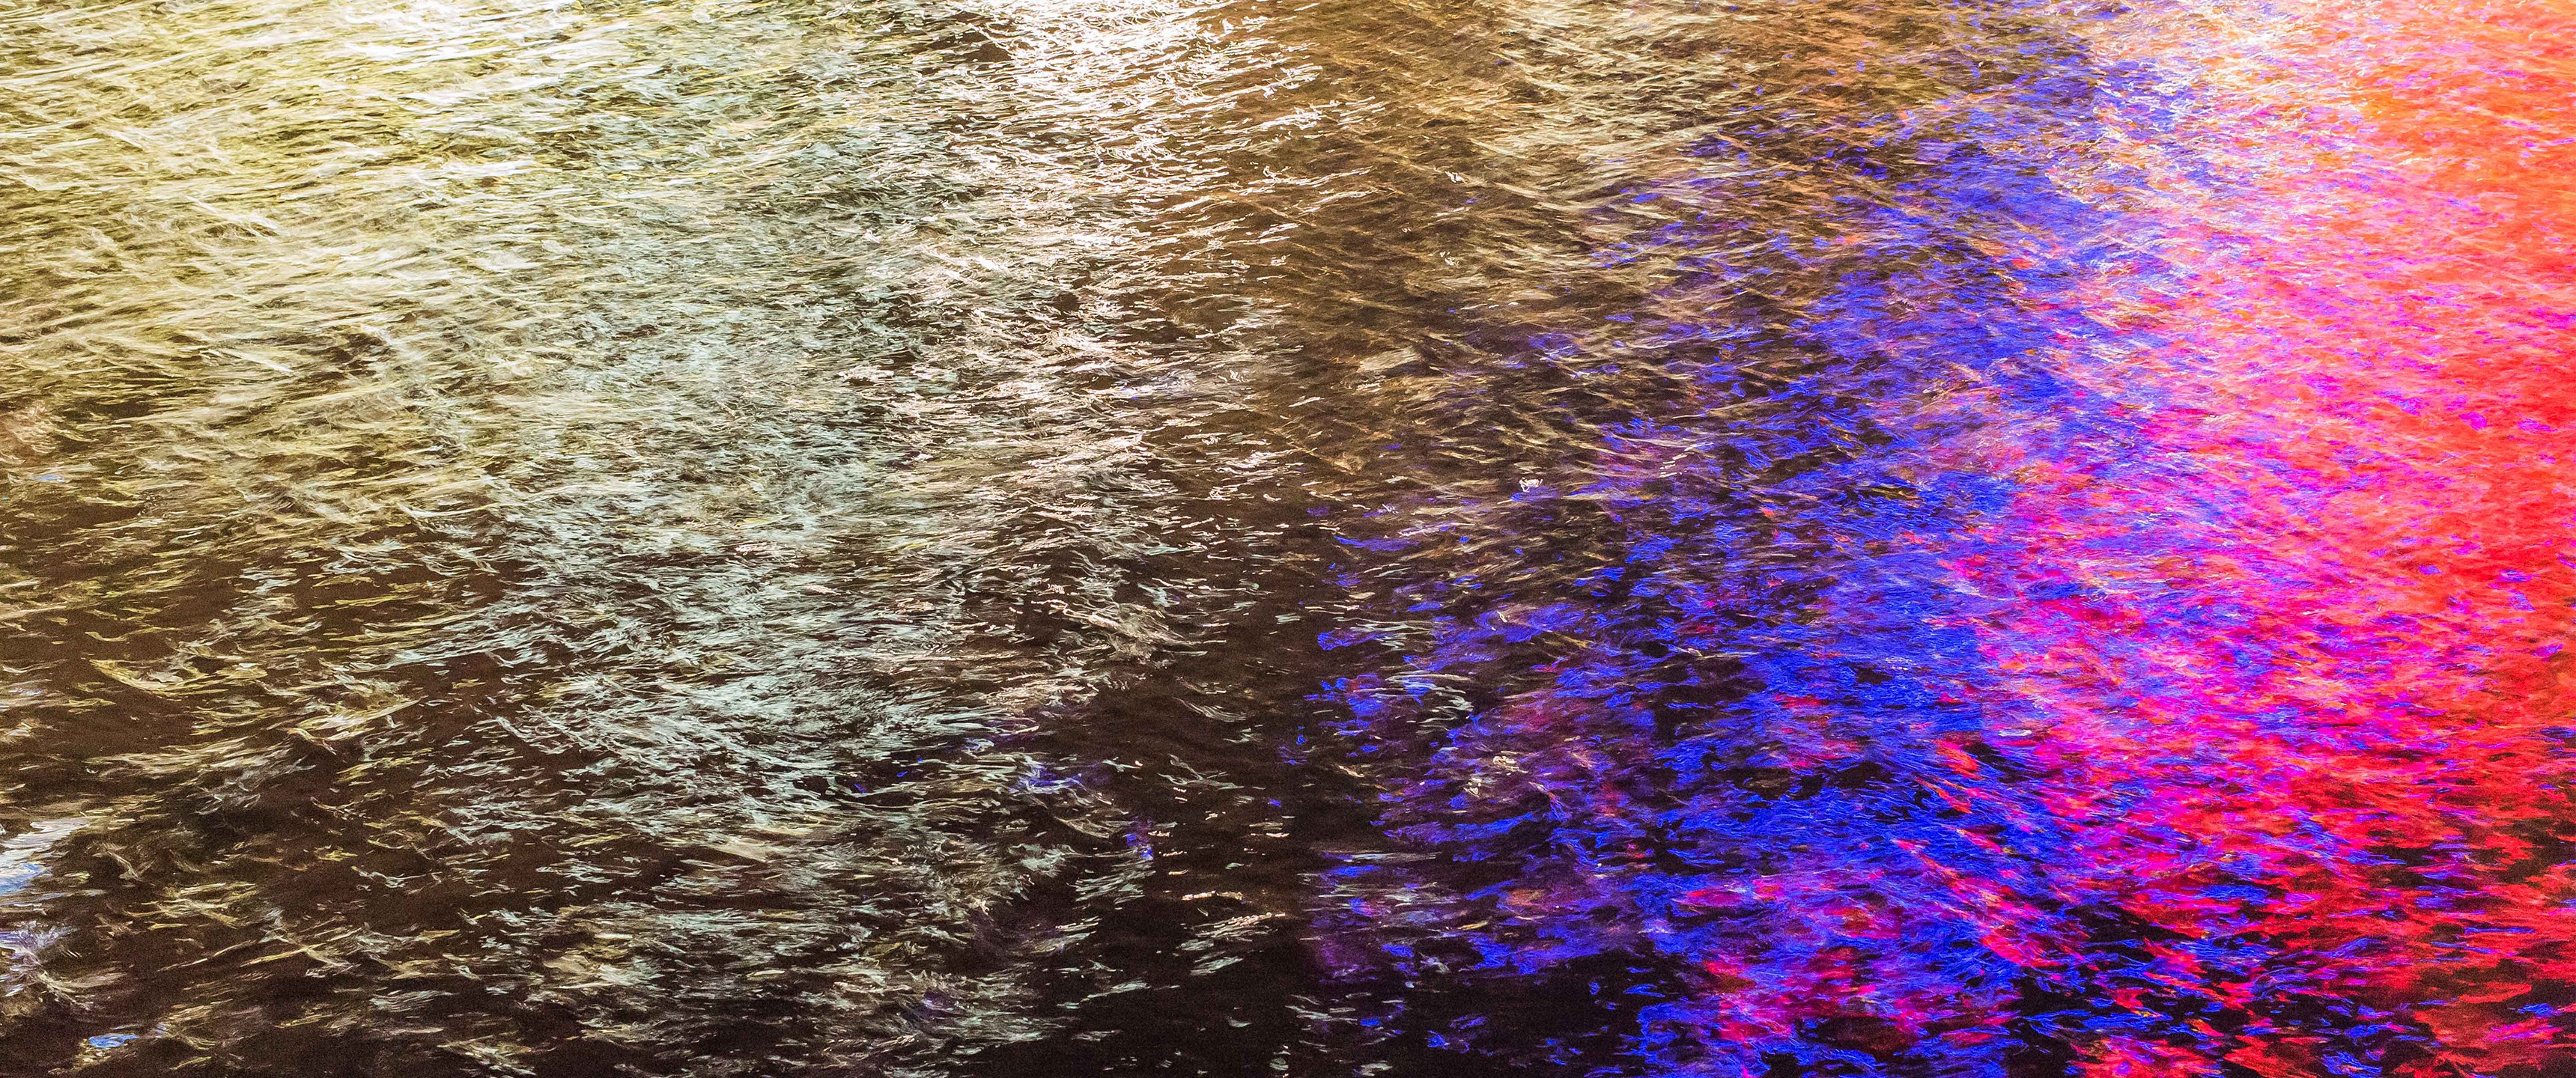 General 3440x1440 water river city lights night reflection ultrawide